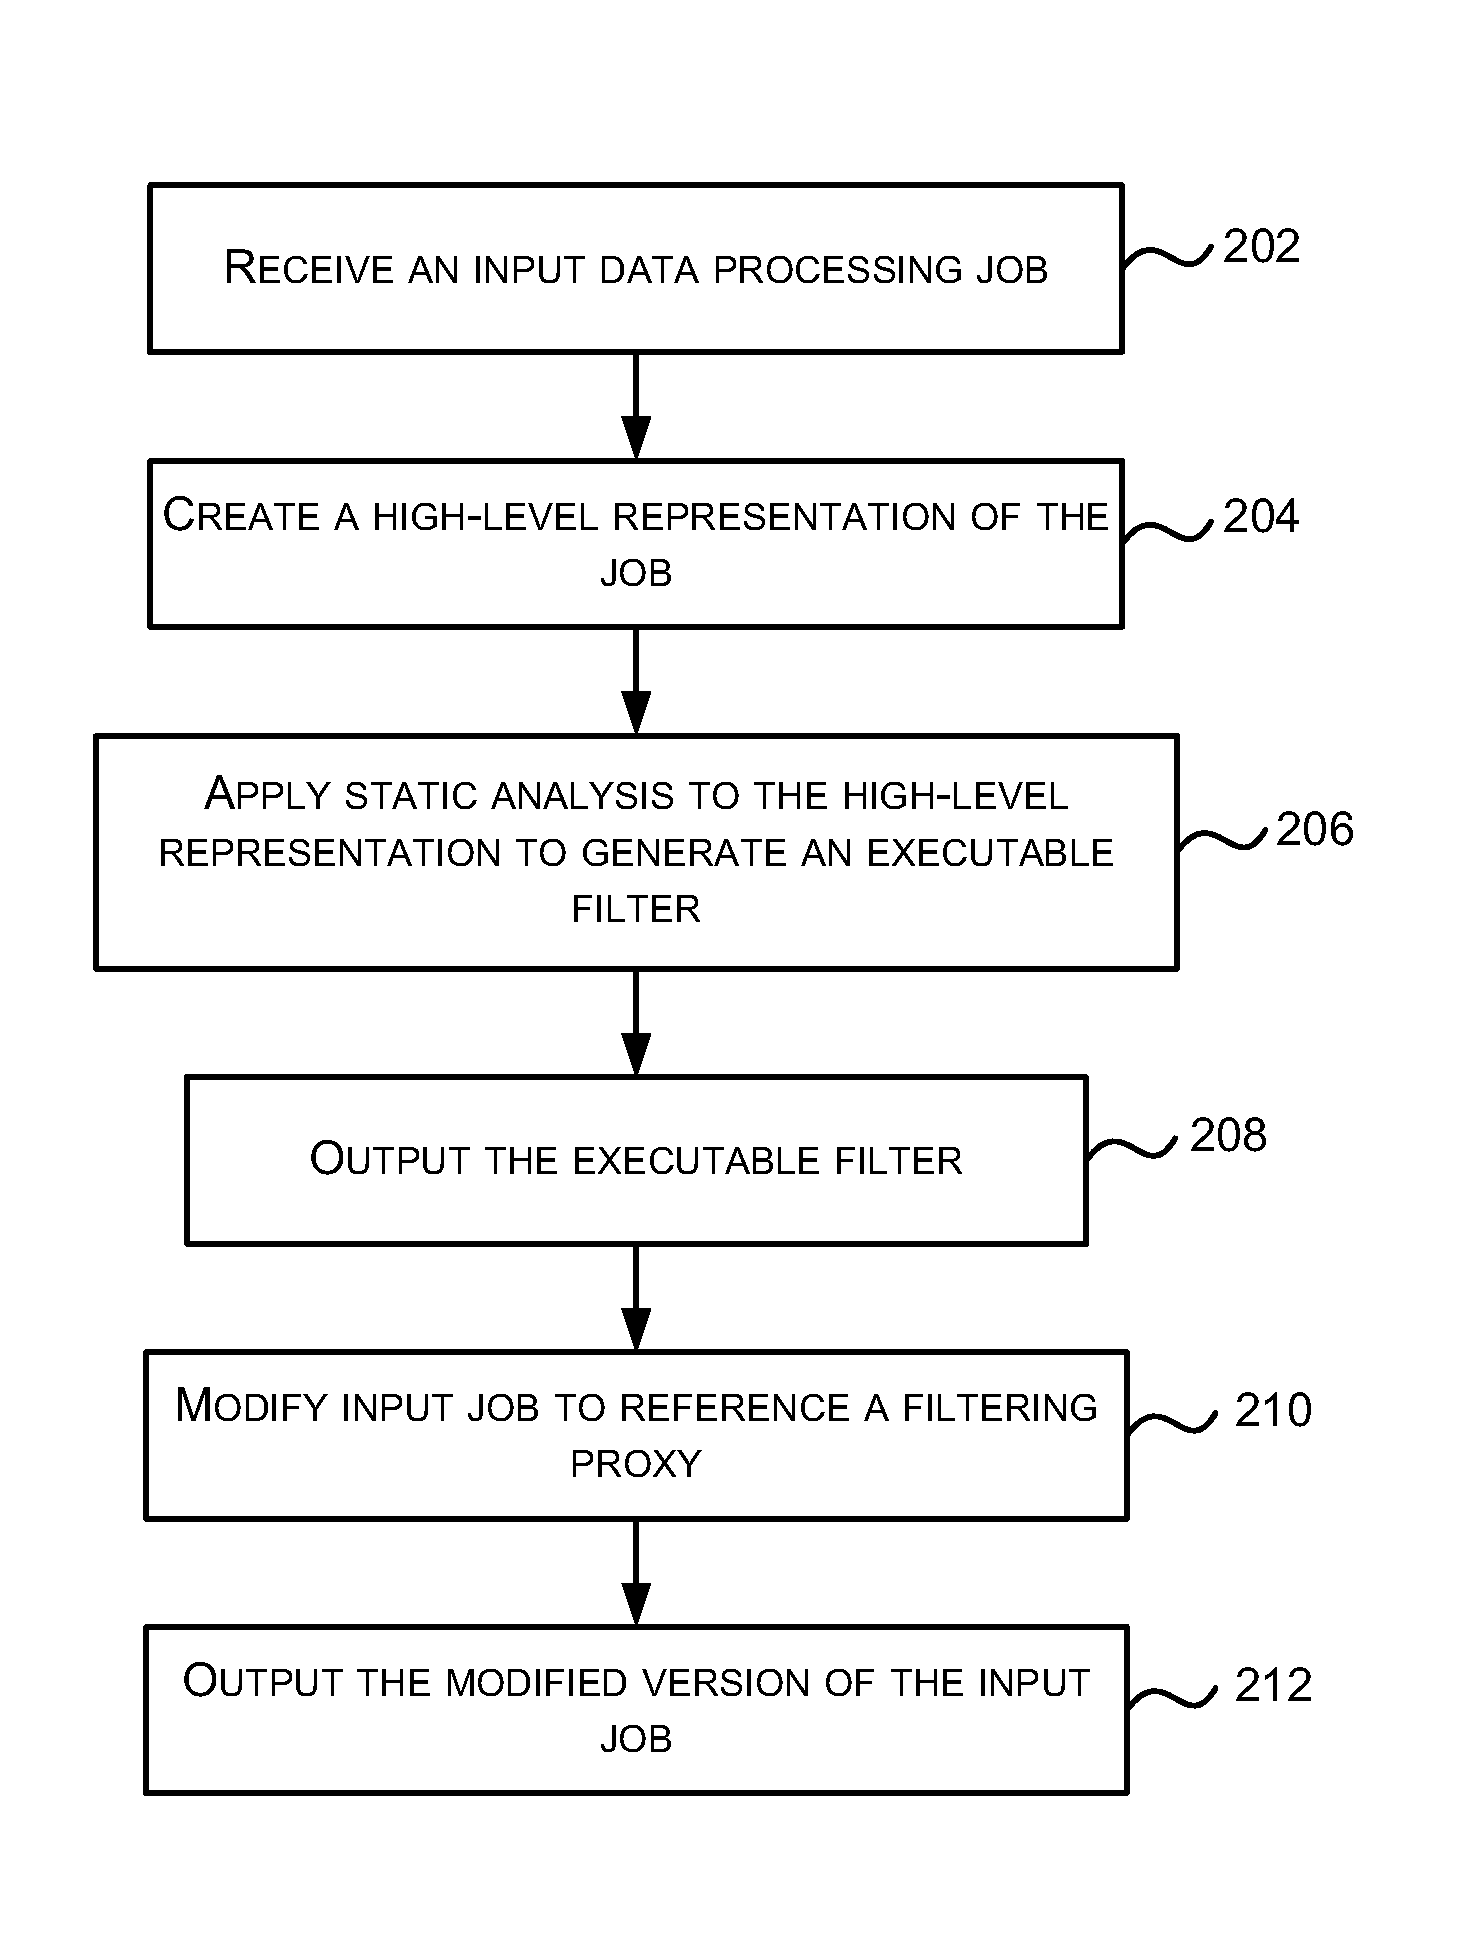 Generating Filters Automatically From Data Processing Jobs